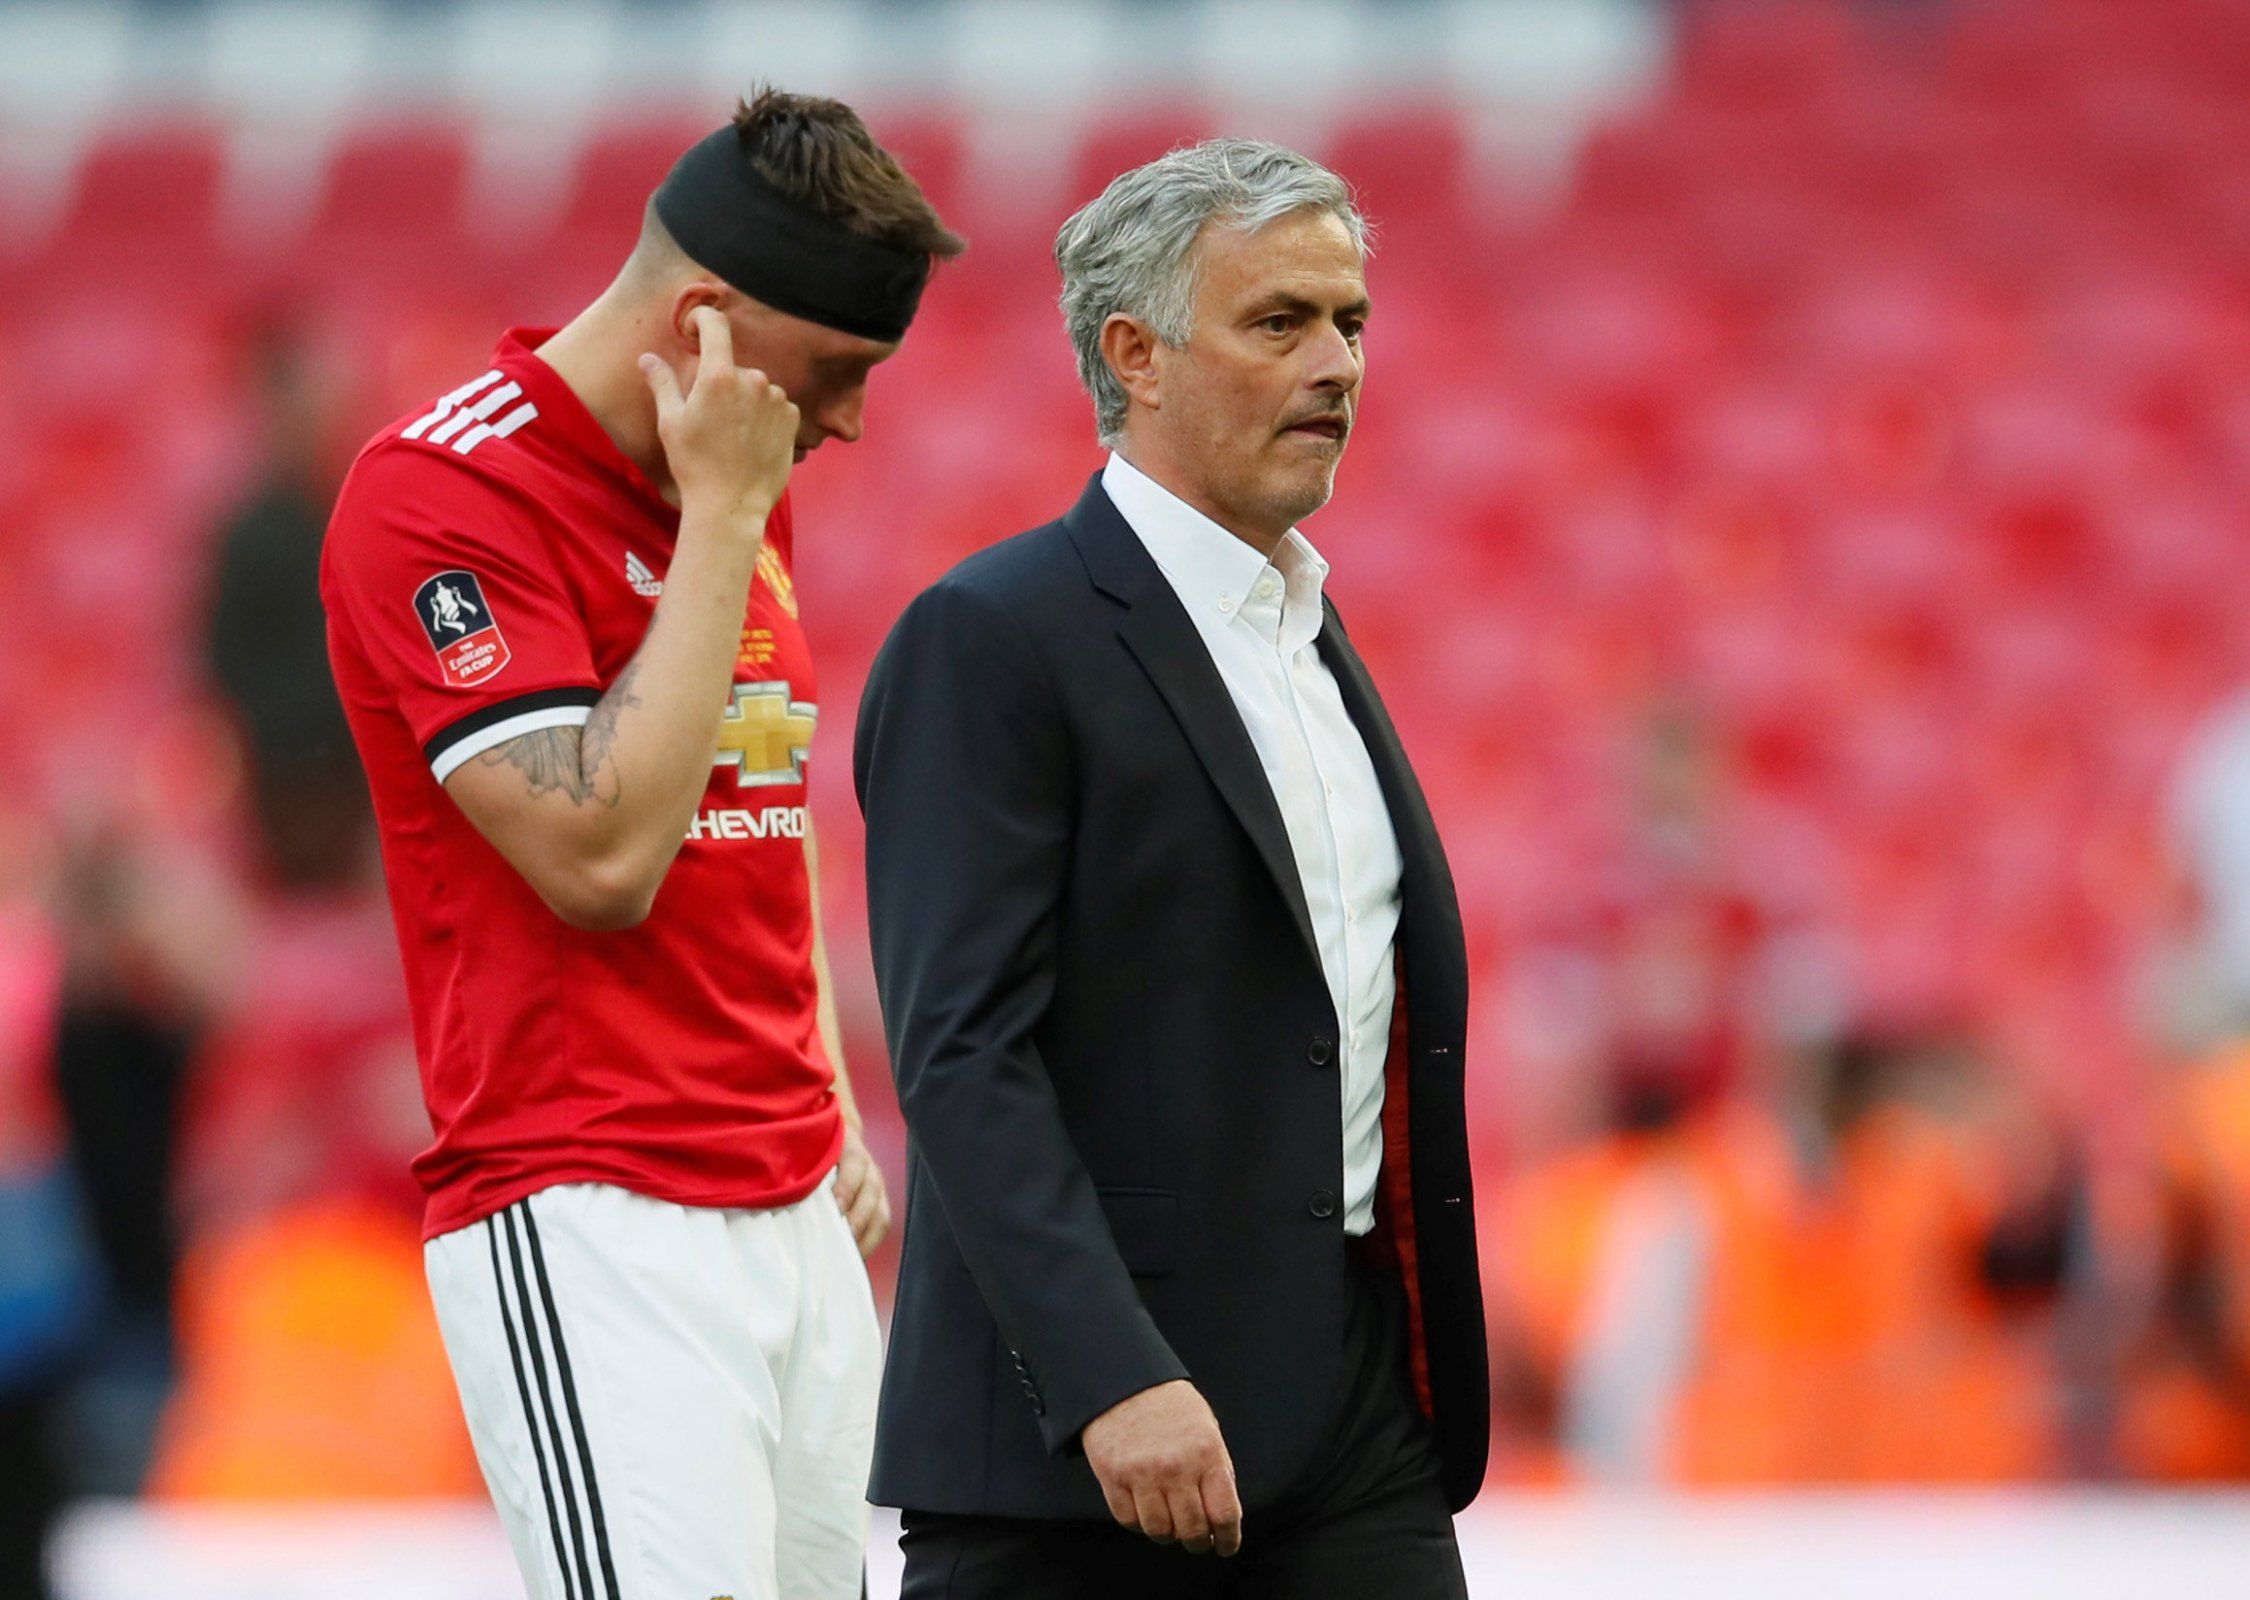 Jose Mourinho and Phil Jones after 2018 FA Cup Final